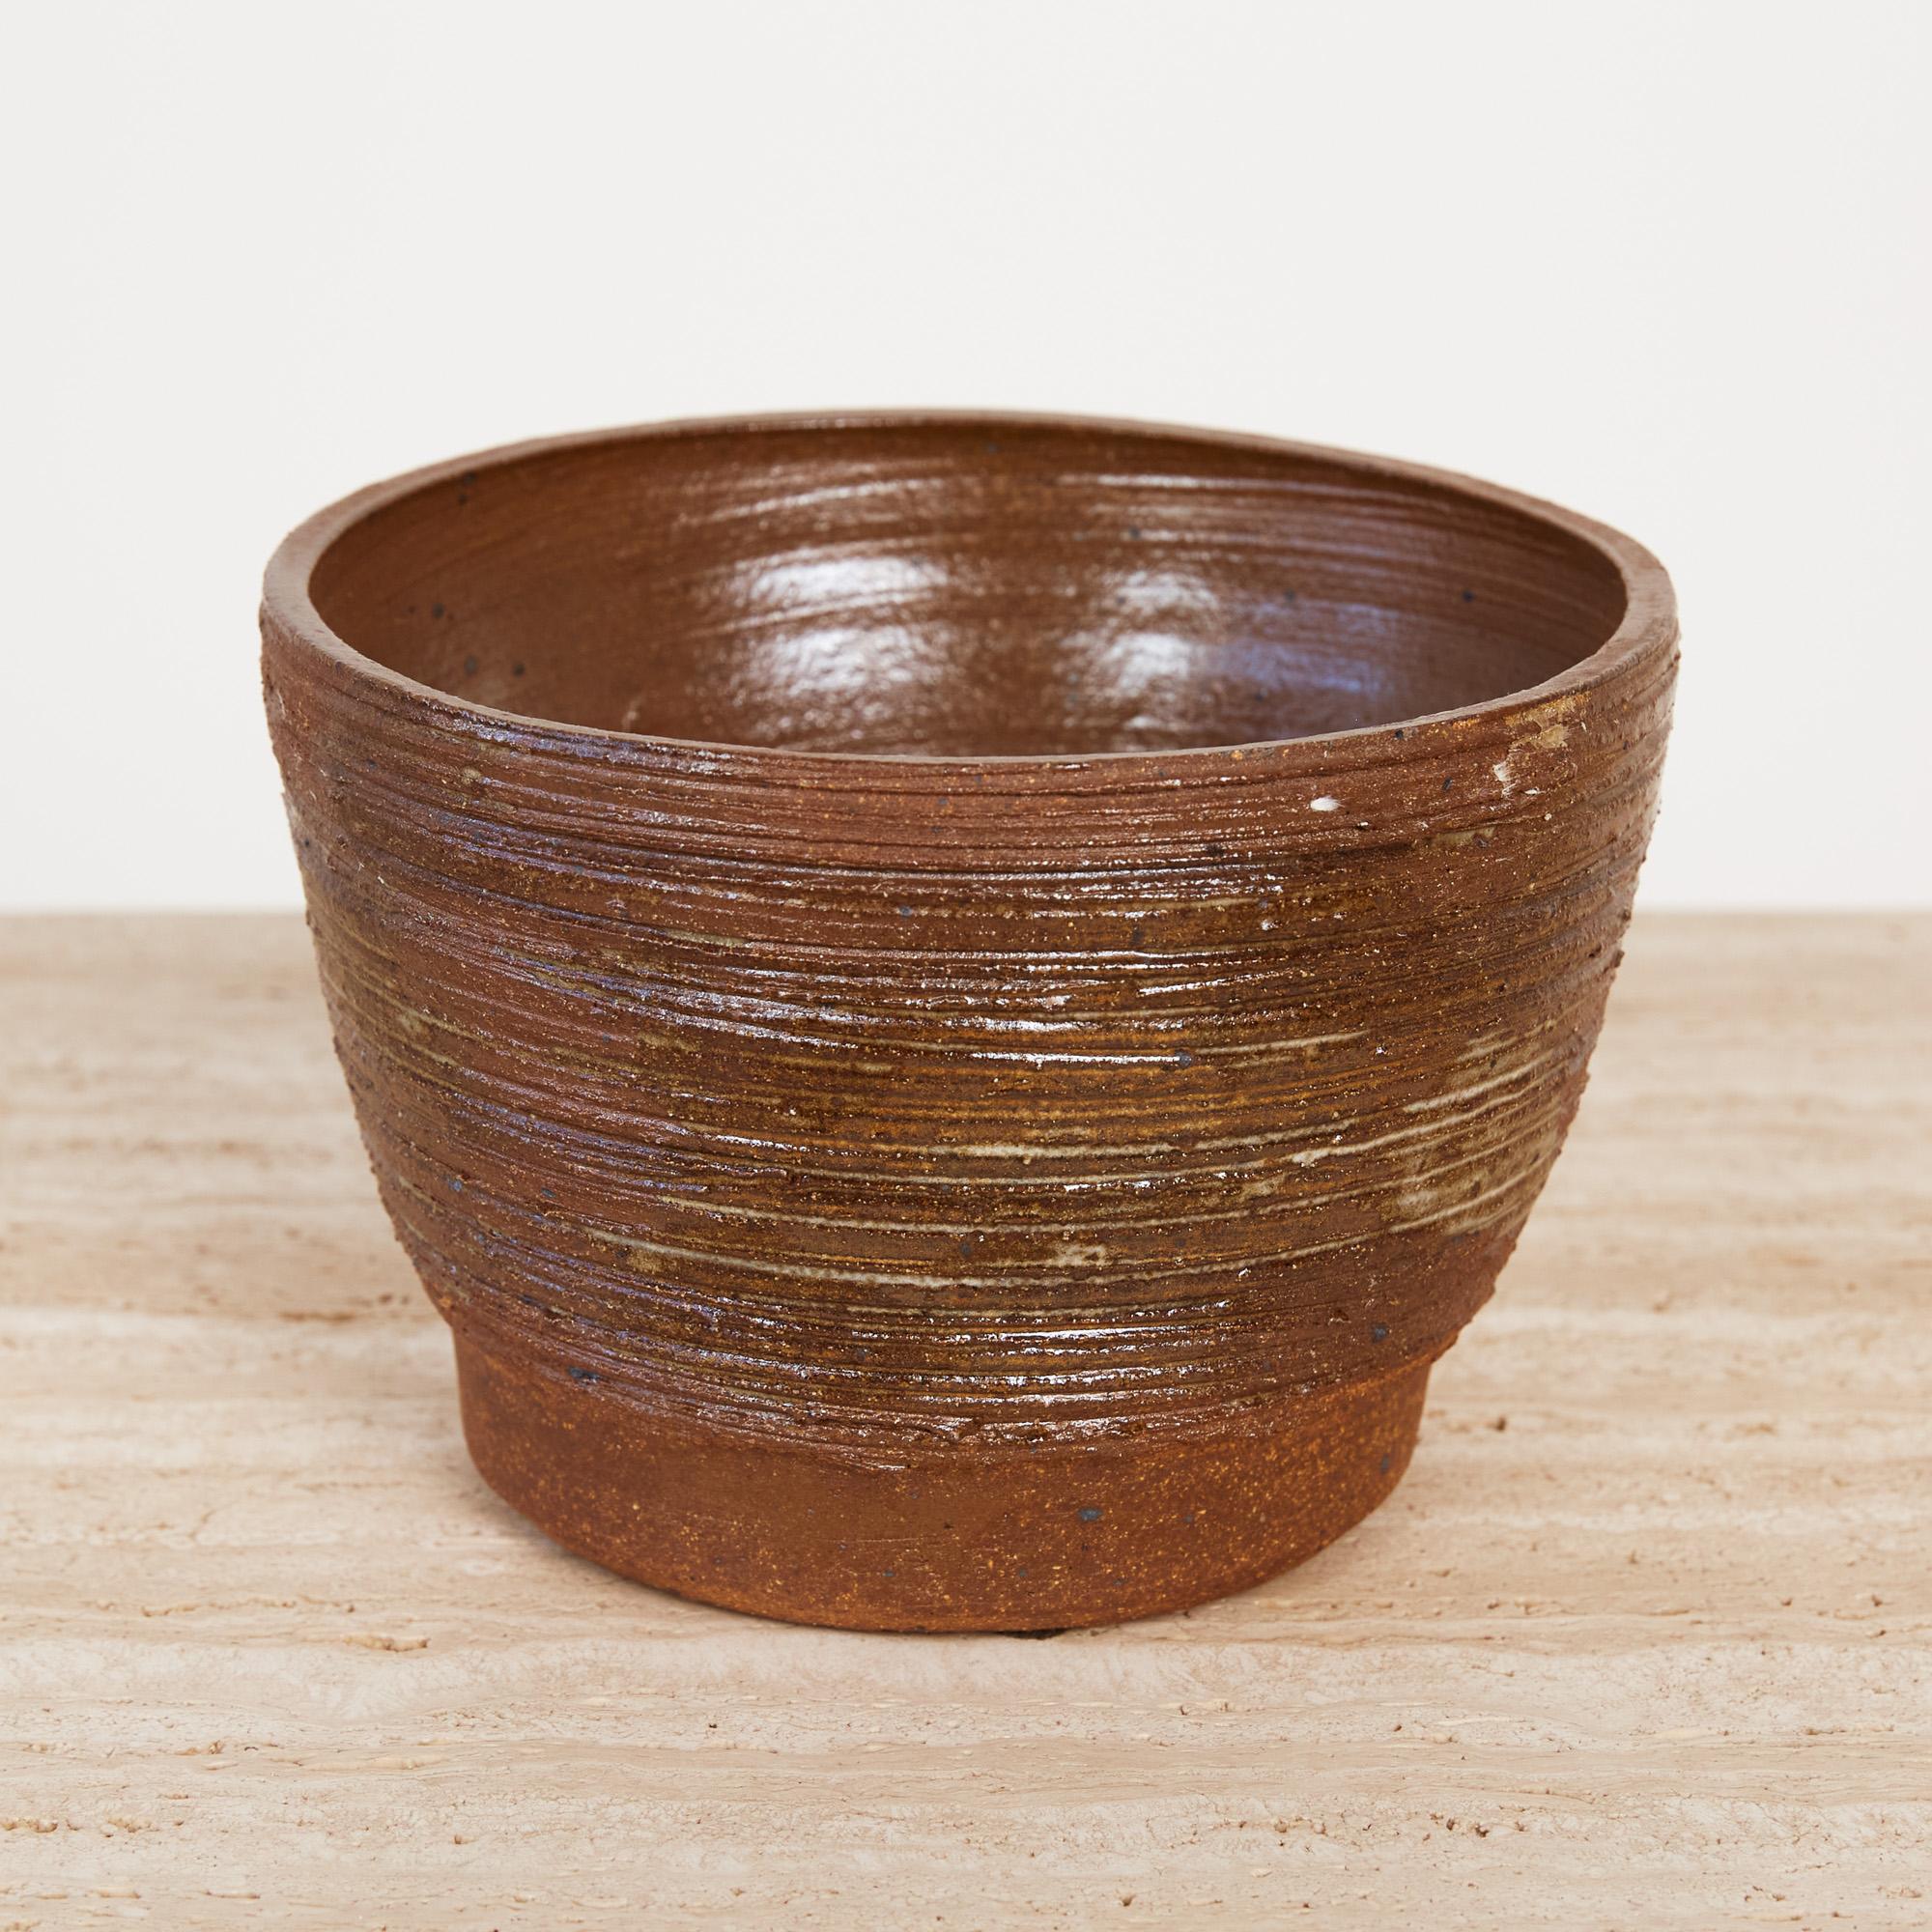 Glazed Ceramic Vessel with Incised Striated Pattern